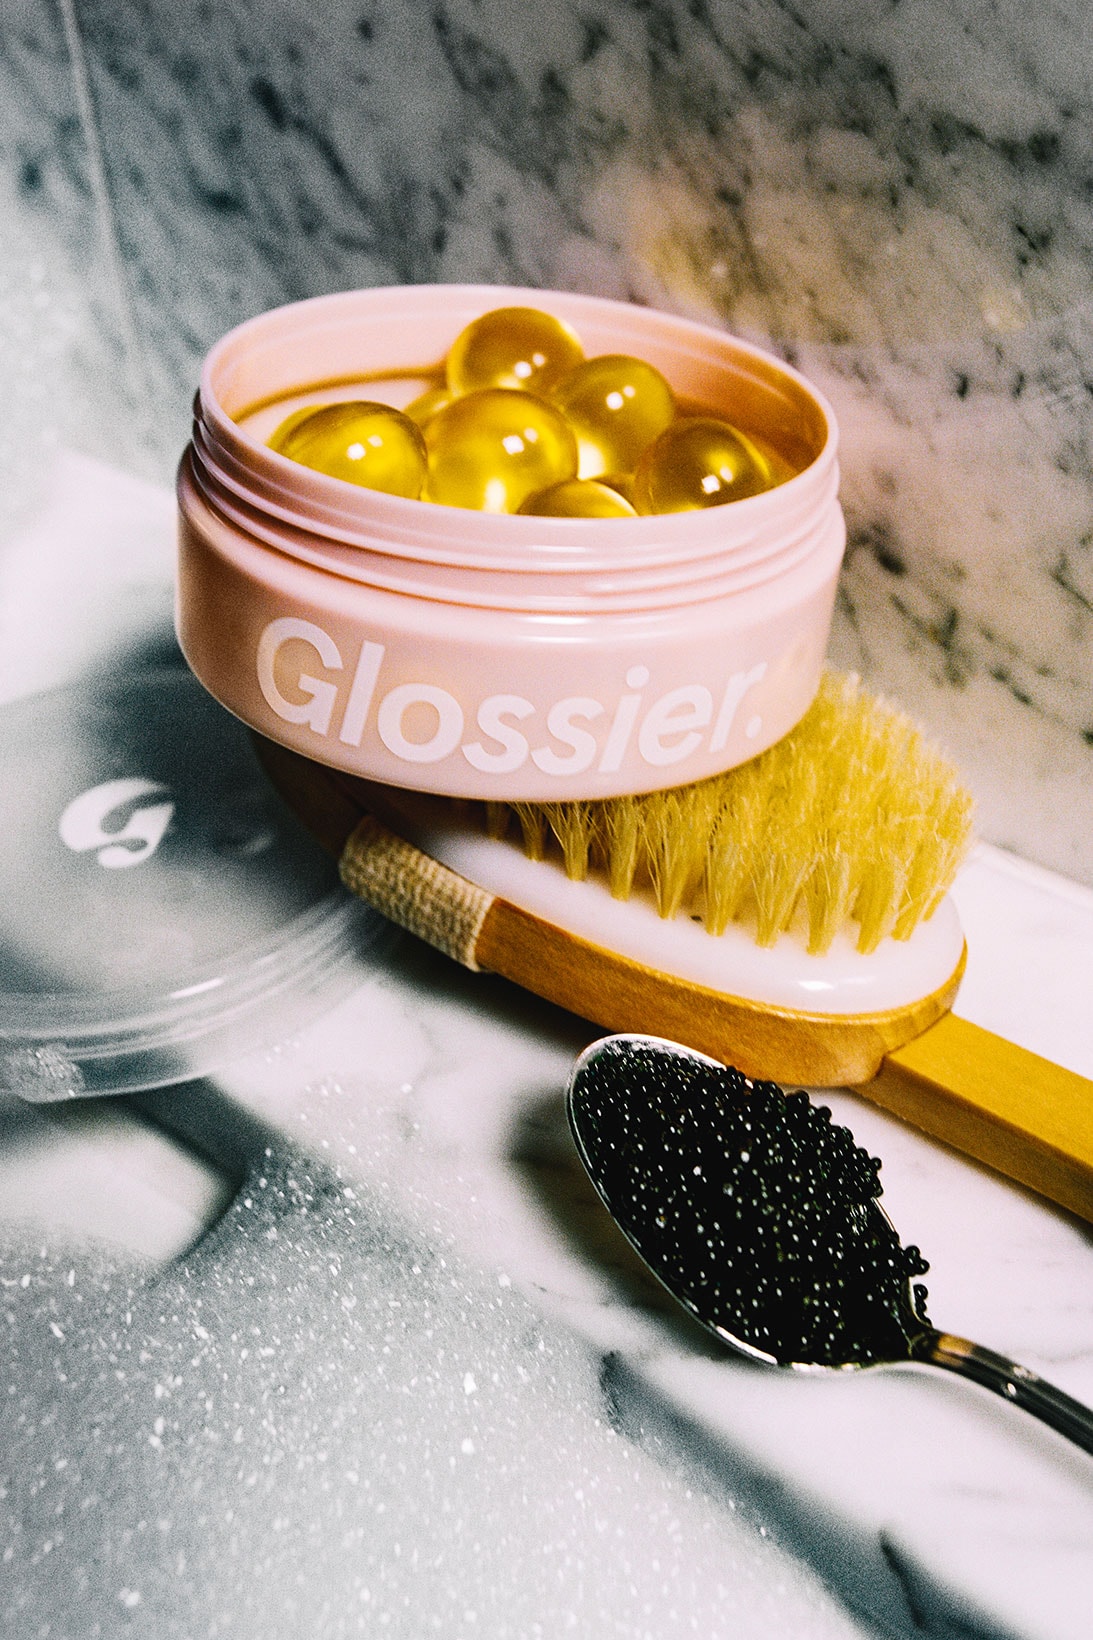 Glossier Holiday Christmas Gift Collection Bath Duo Pods Caviar